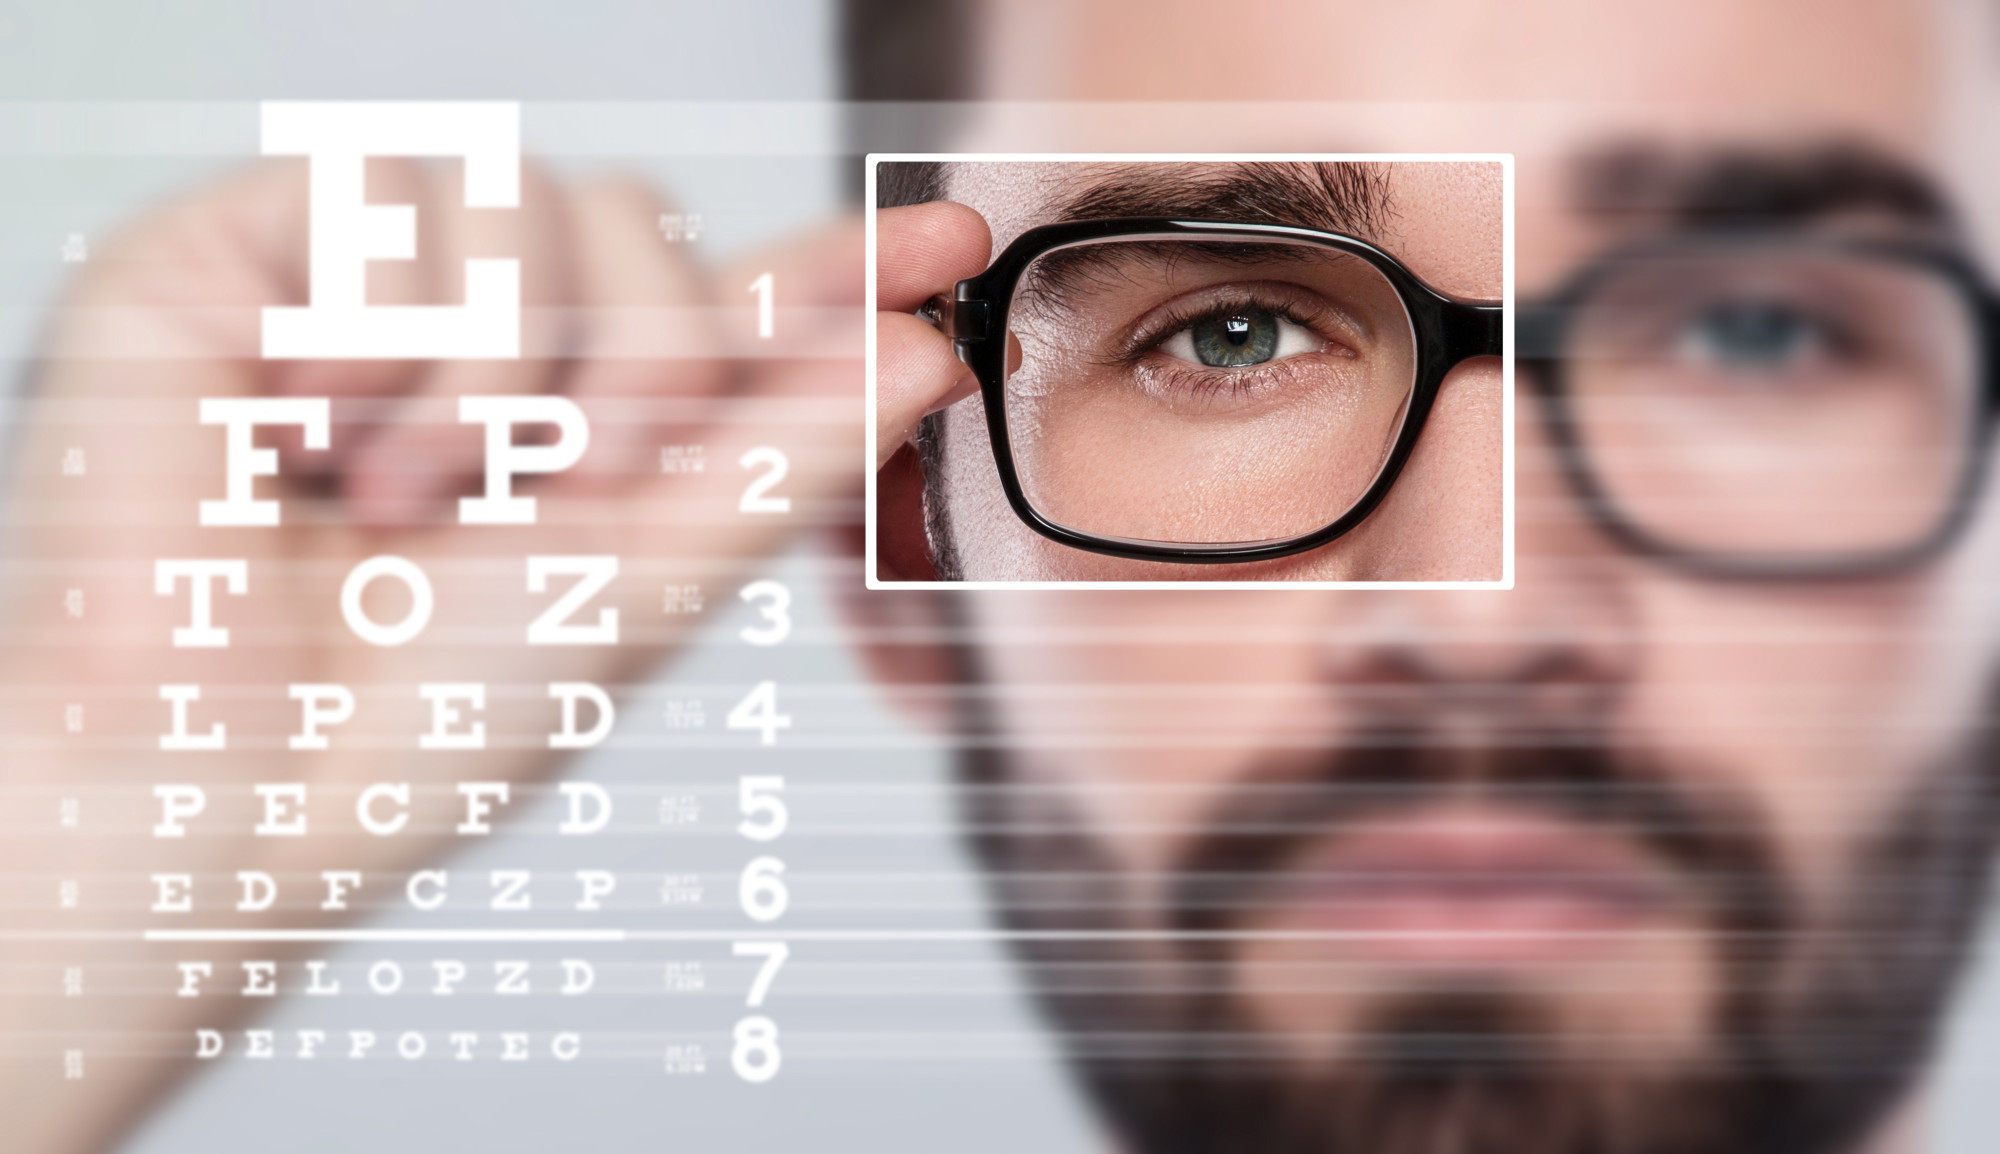 If you think there's no harm in skipping eye exams, think again. Keep reading to learn why it's essential to have regular eye exams every year.